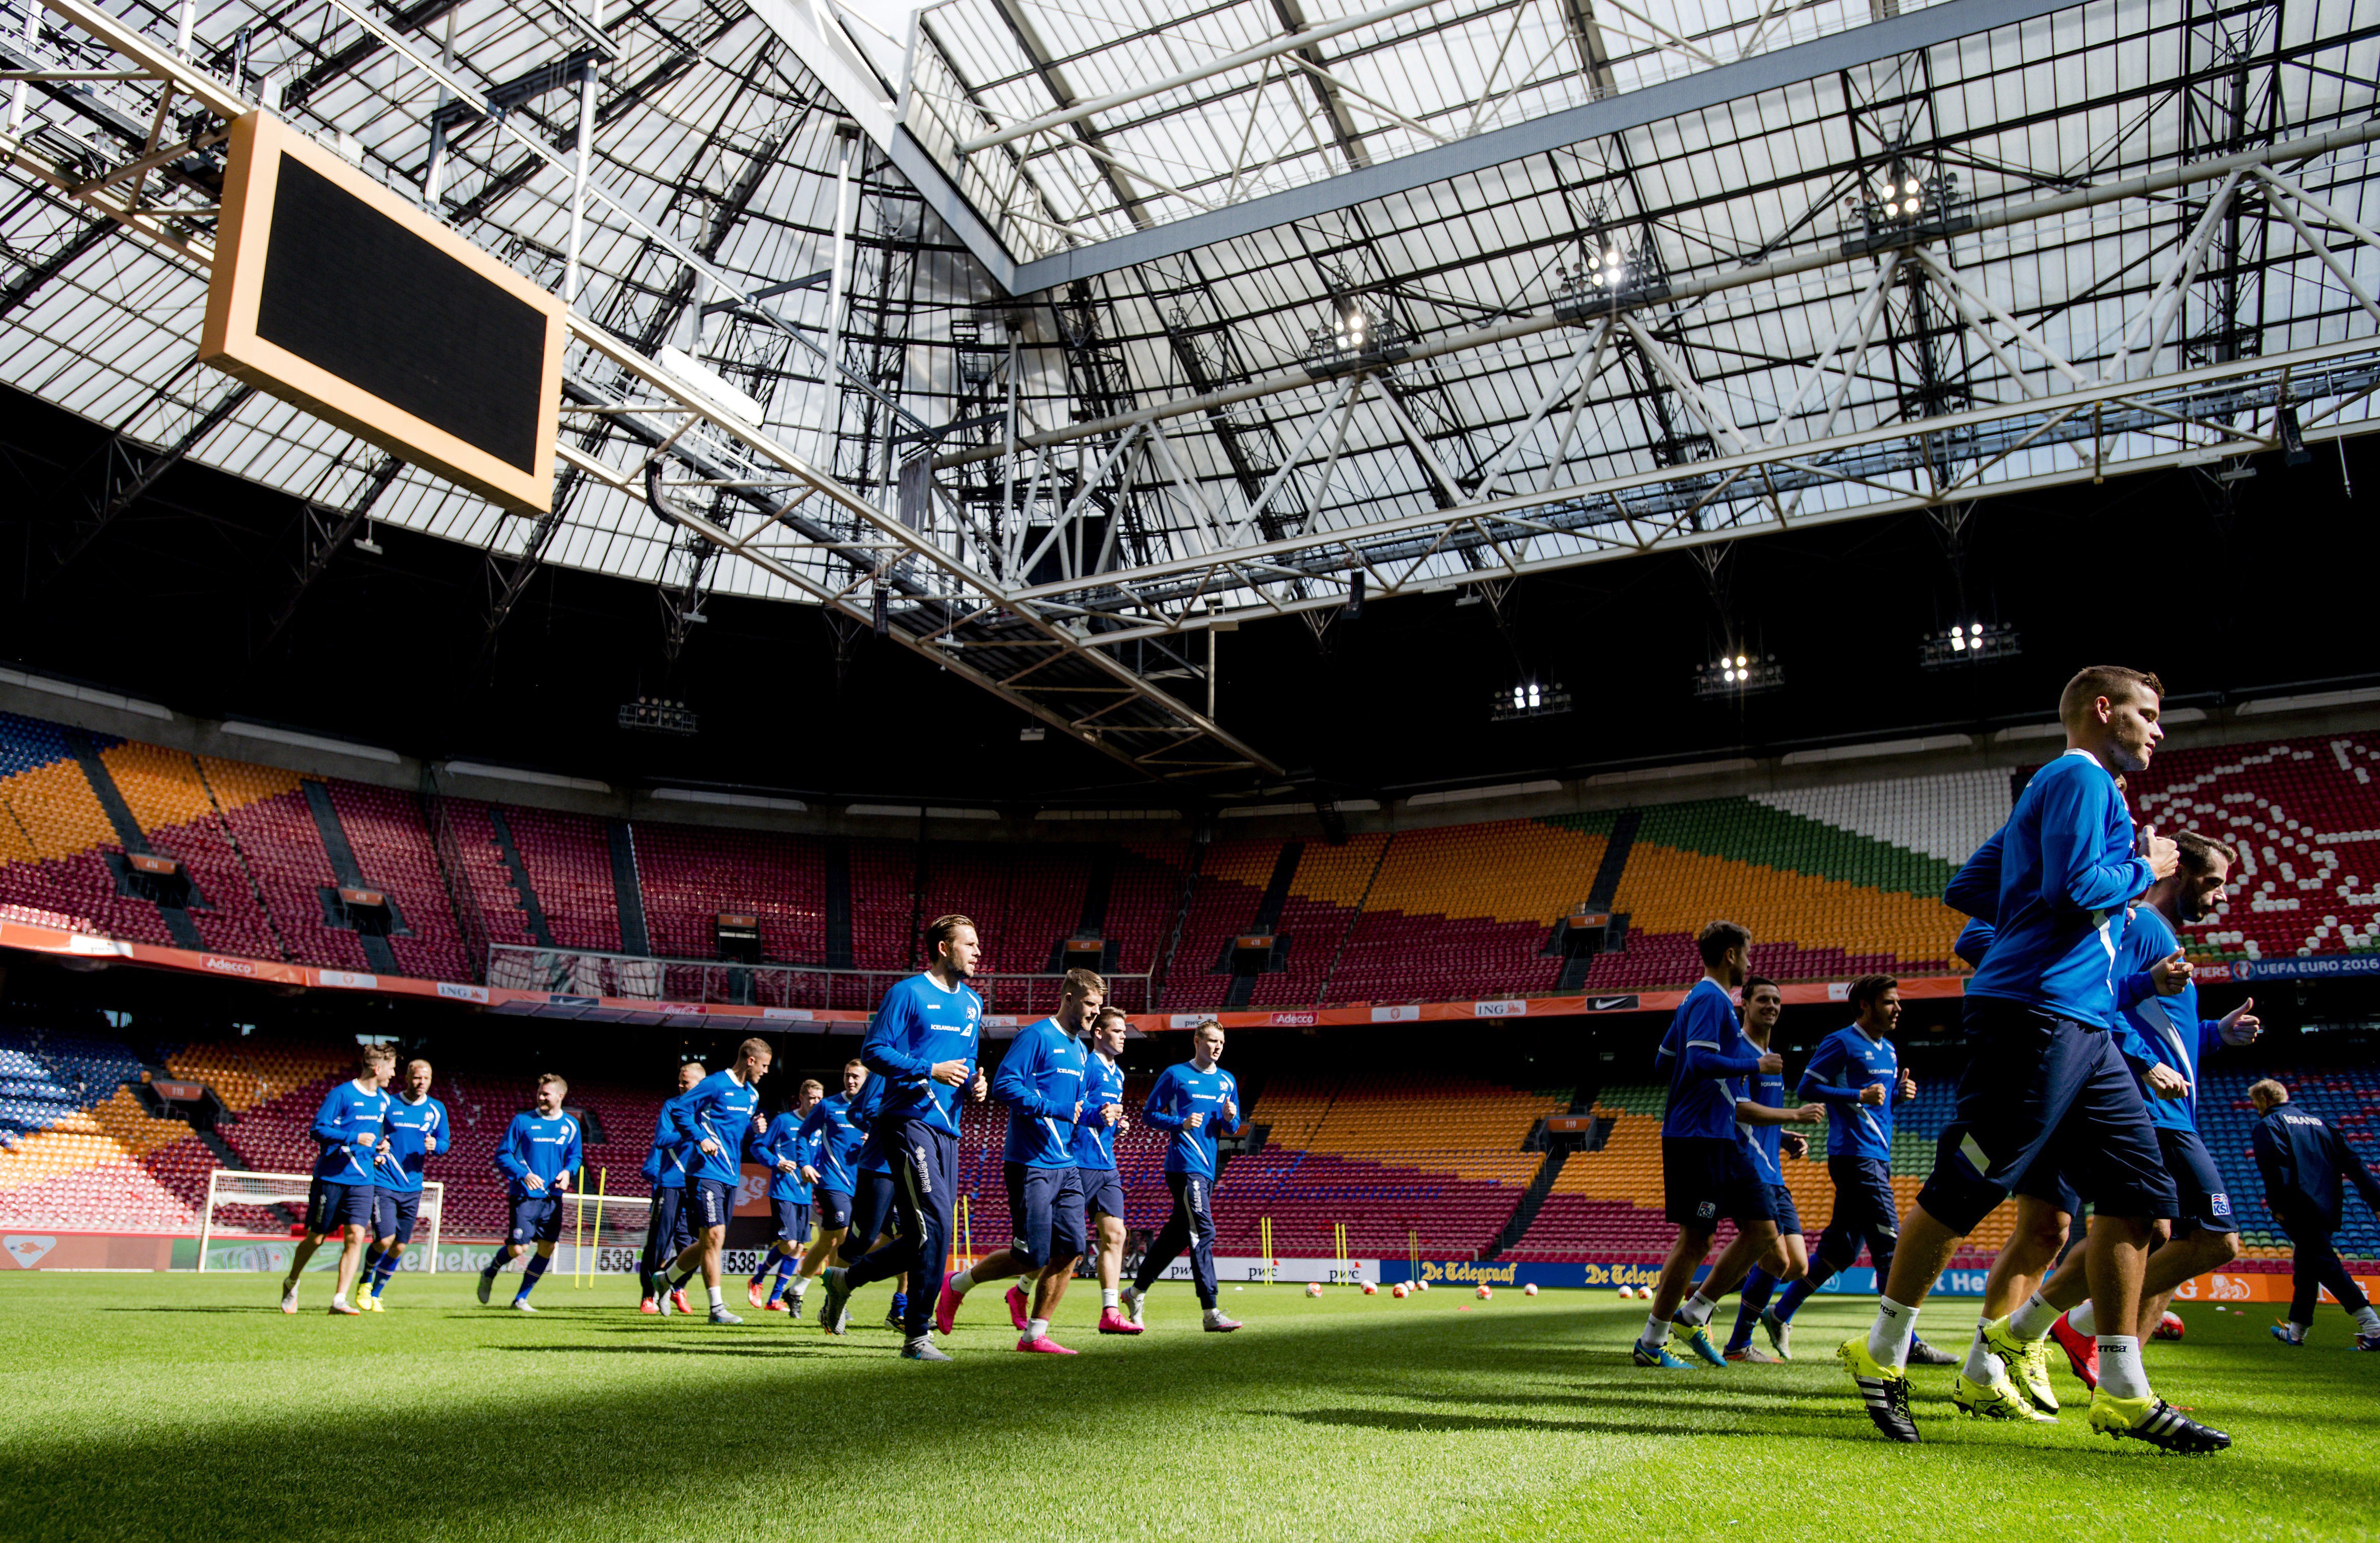 Iceland's national football team players train in the Amsterdam Arena, in Amsterdam, the Netherlands, on September 2, 2015, in preparation for their Euro 2016 qualifying football match against the Netherlands. ANP ROBIN VAN LONKHUIJSEN  --NETHERLANDS OUT--        (Photo credit should read ROBIN VAN LONKHUIJSEN/AFP/Getty Images)